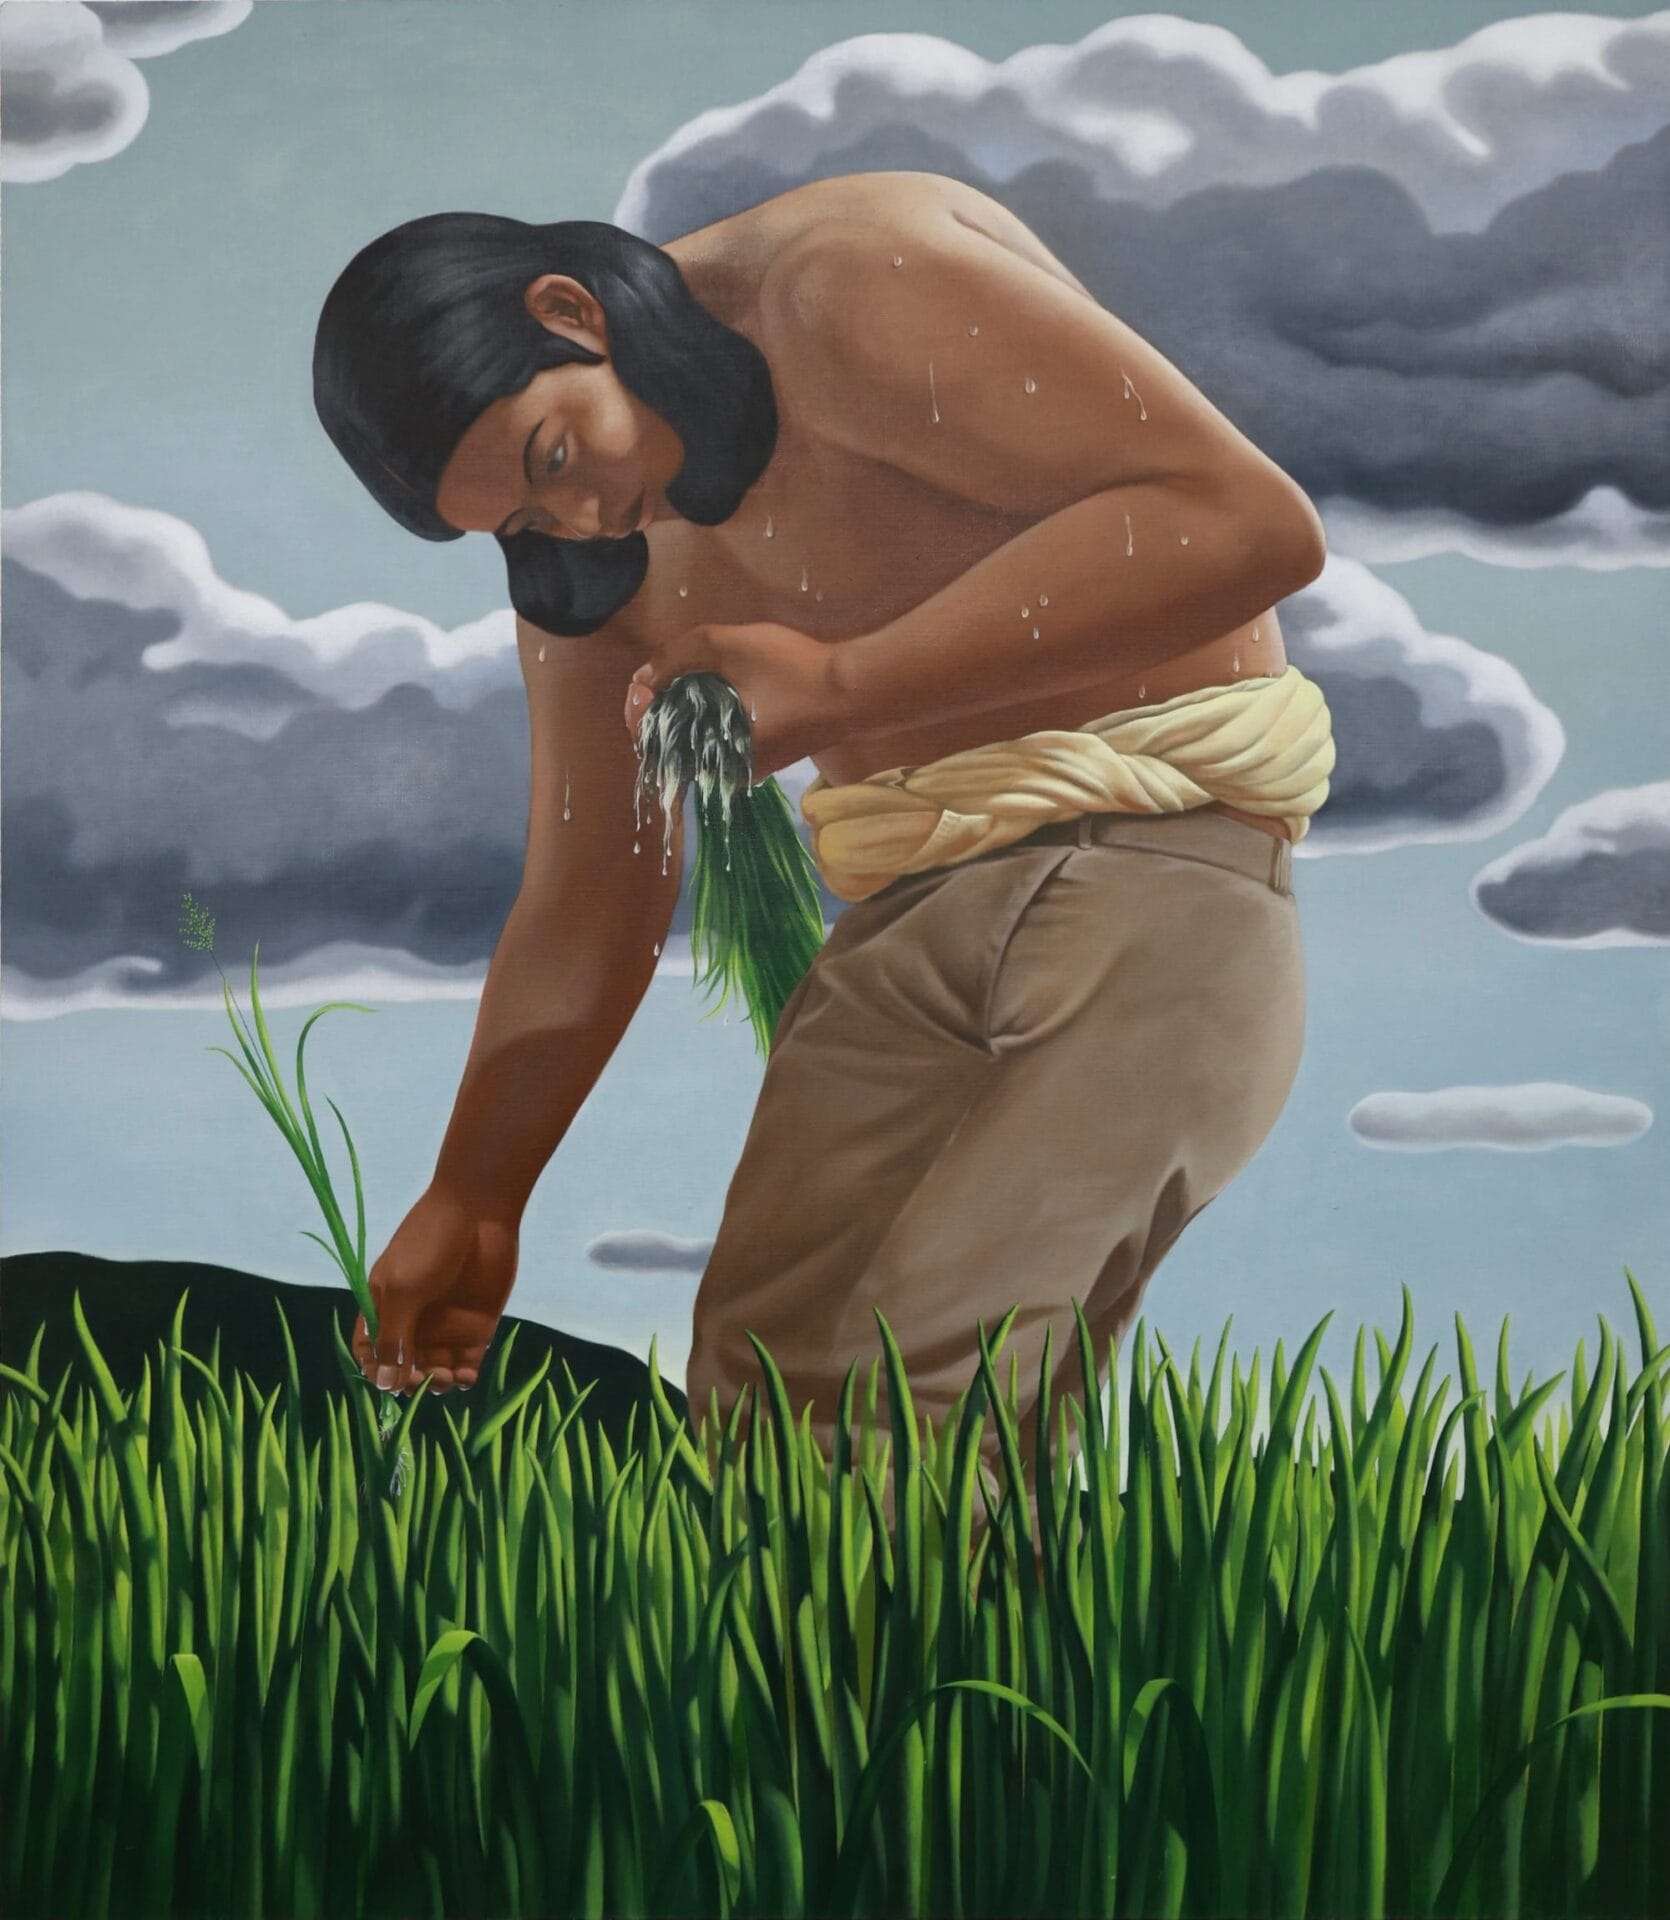 a shirtless man hunches over and grasps green grass in a field